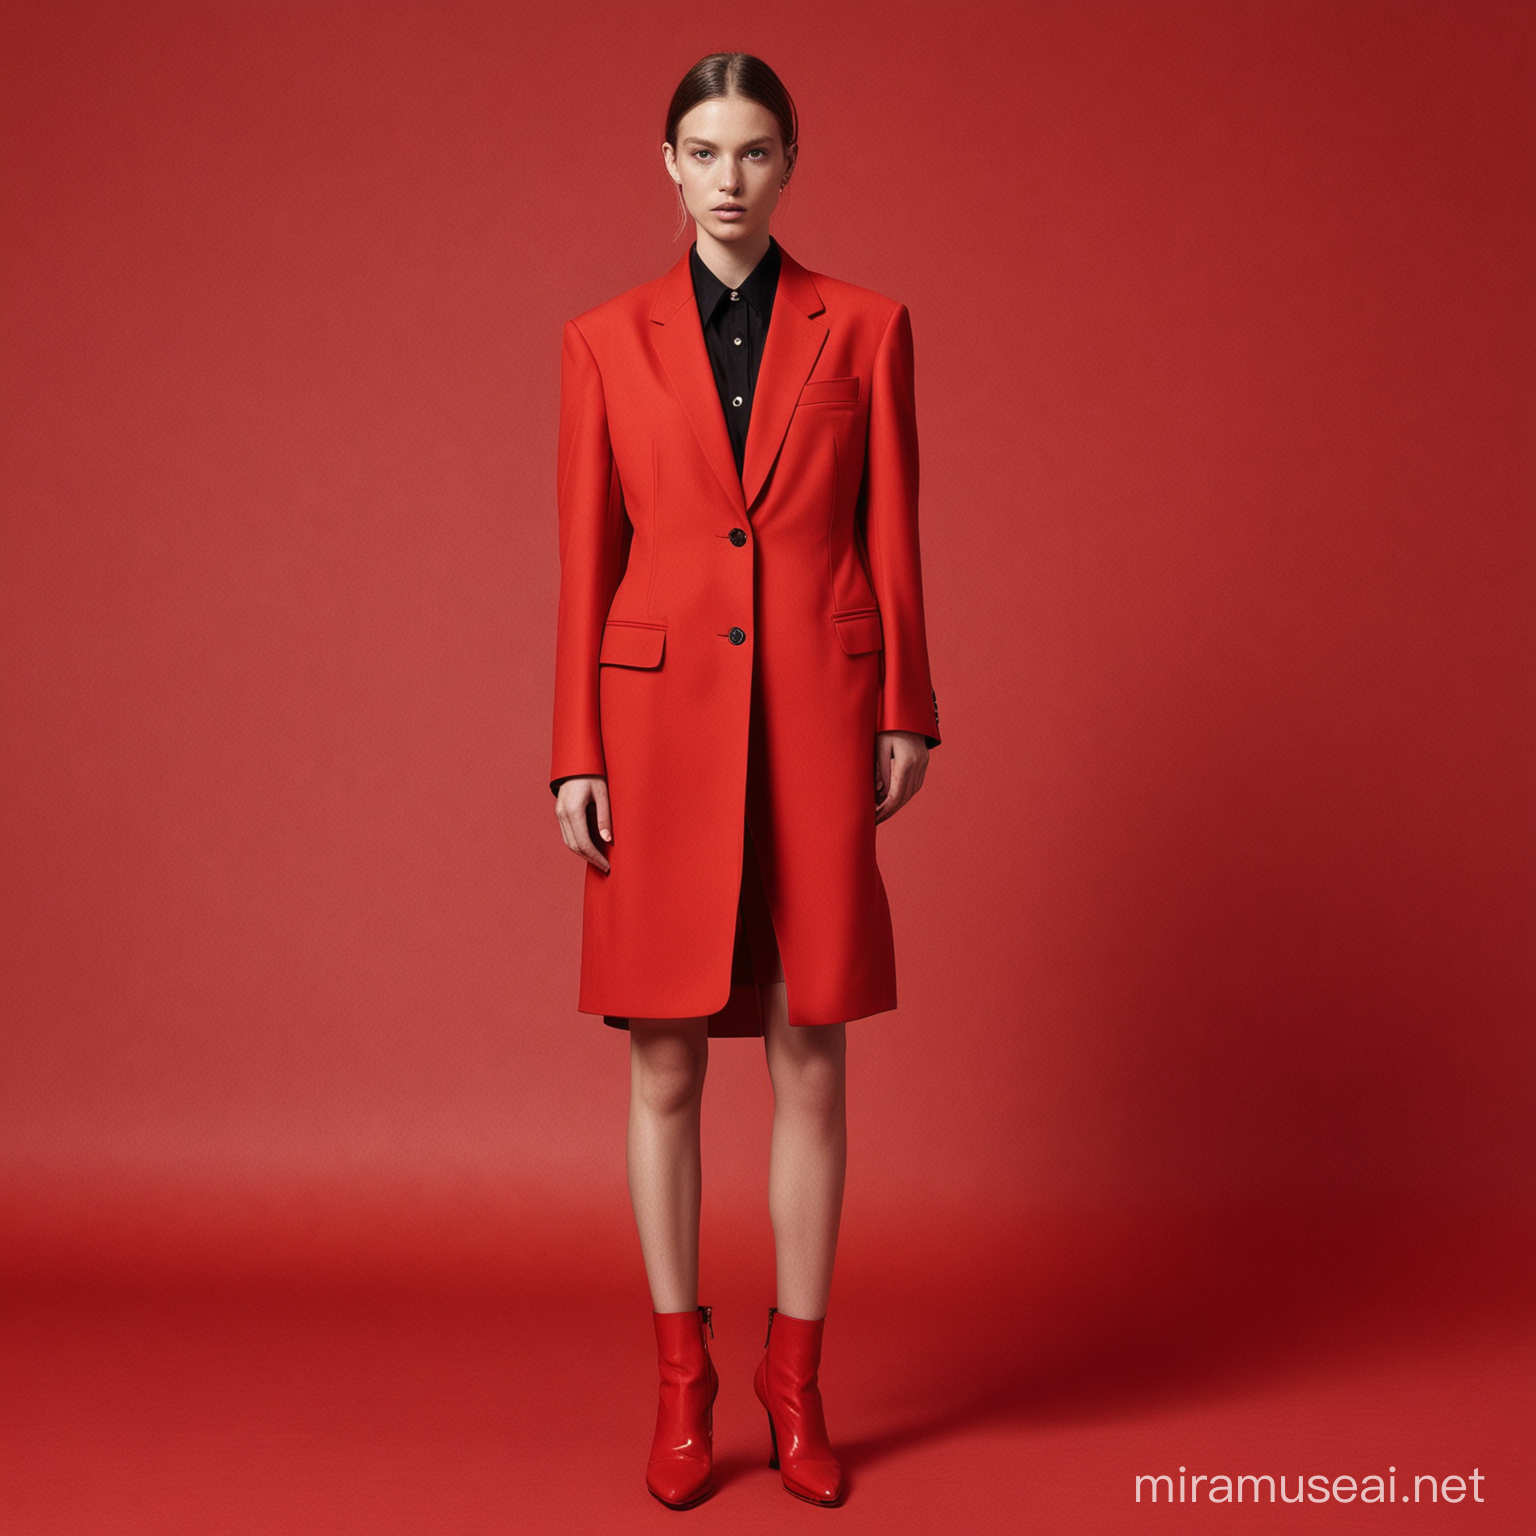 can give me an image from a Balenciaga campaign which is minimalist and refined with a red background et red clothes